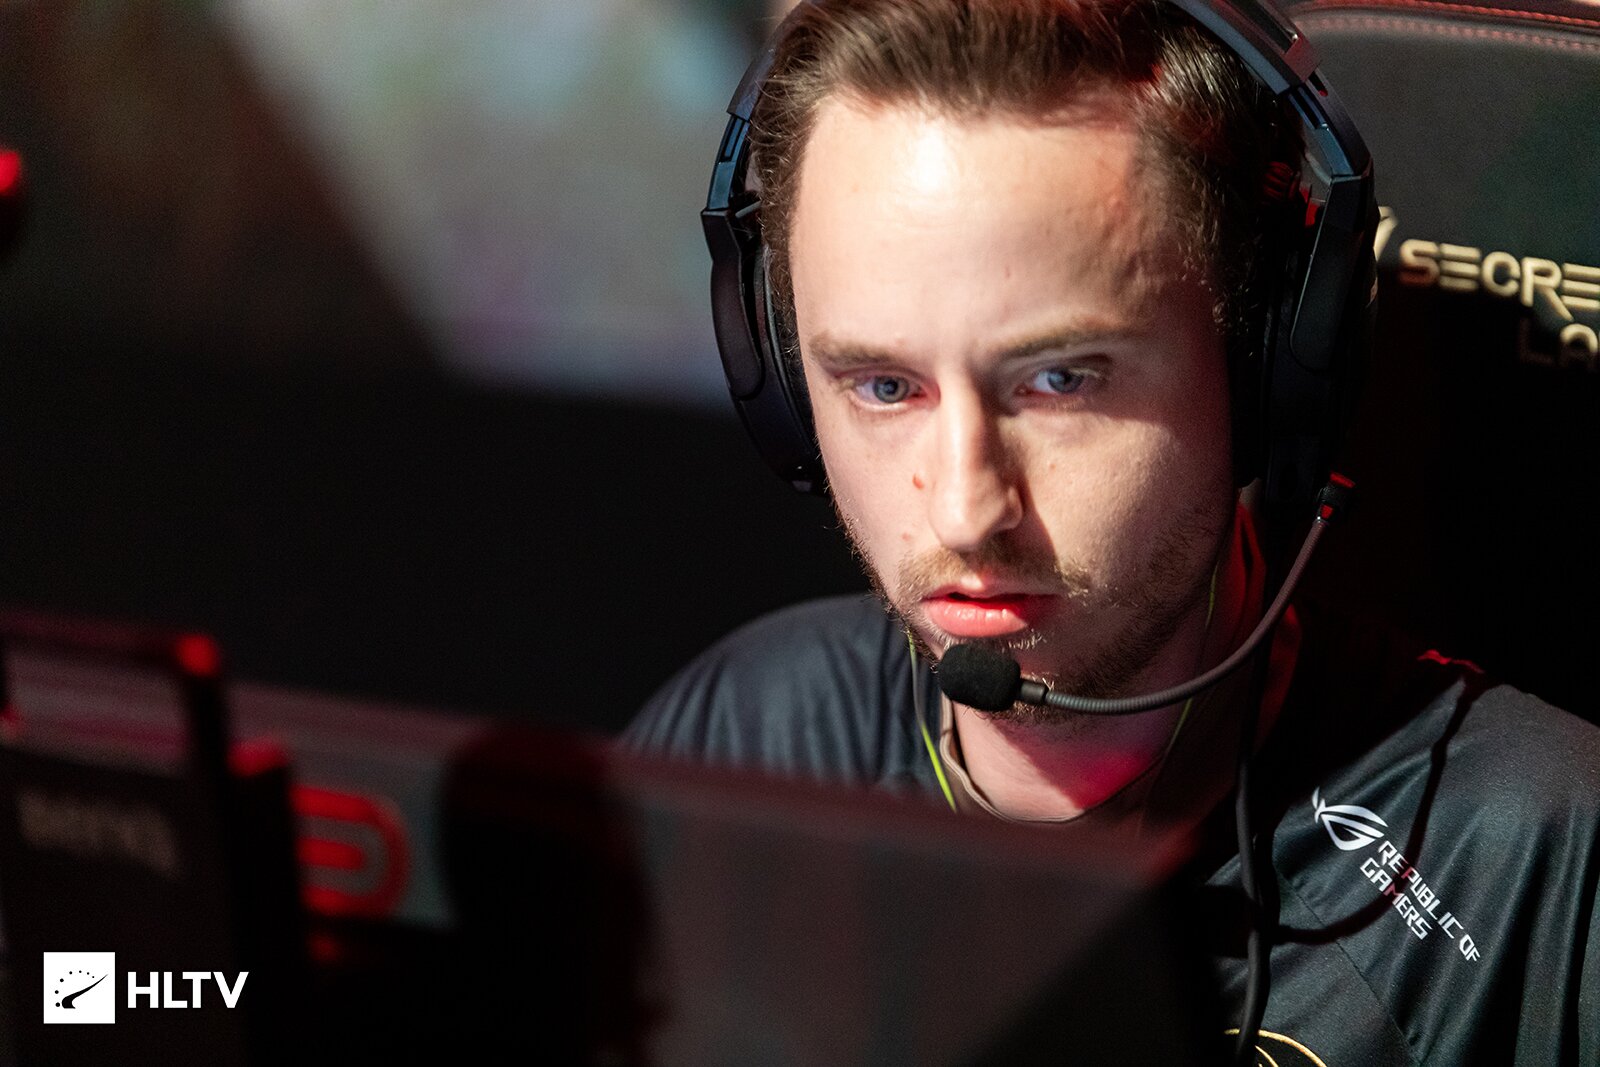 NiP parts ways with GeT_RiGhT, who had played with the organization's Counter-Strike team for seven years. (Photo via HLTV)